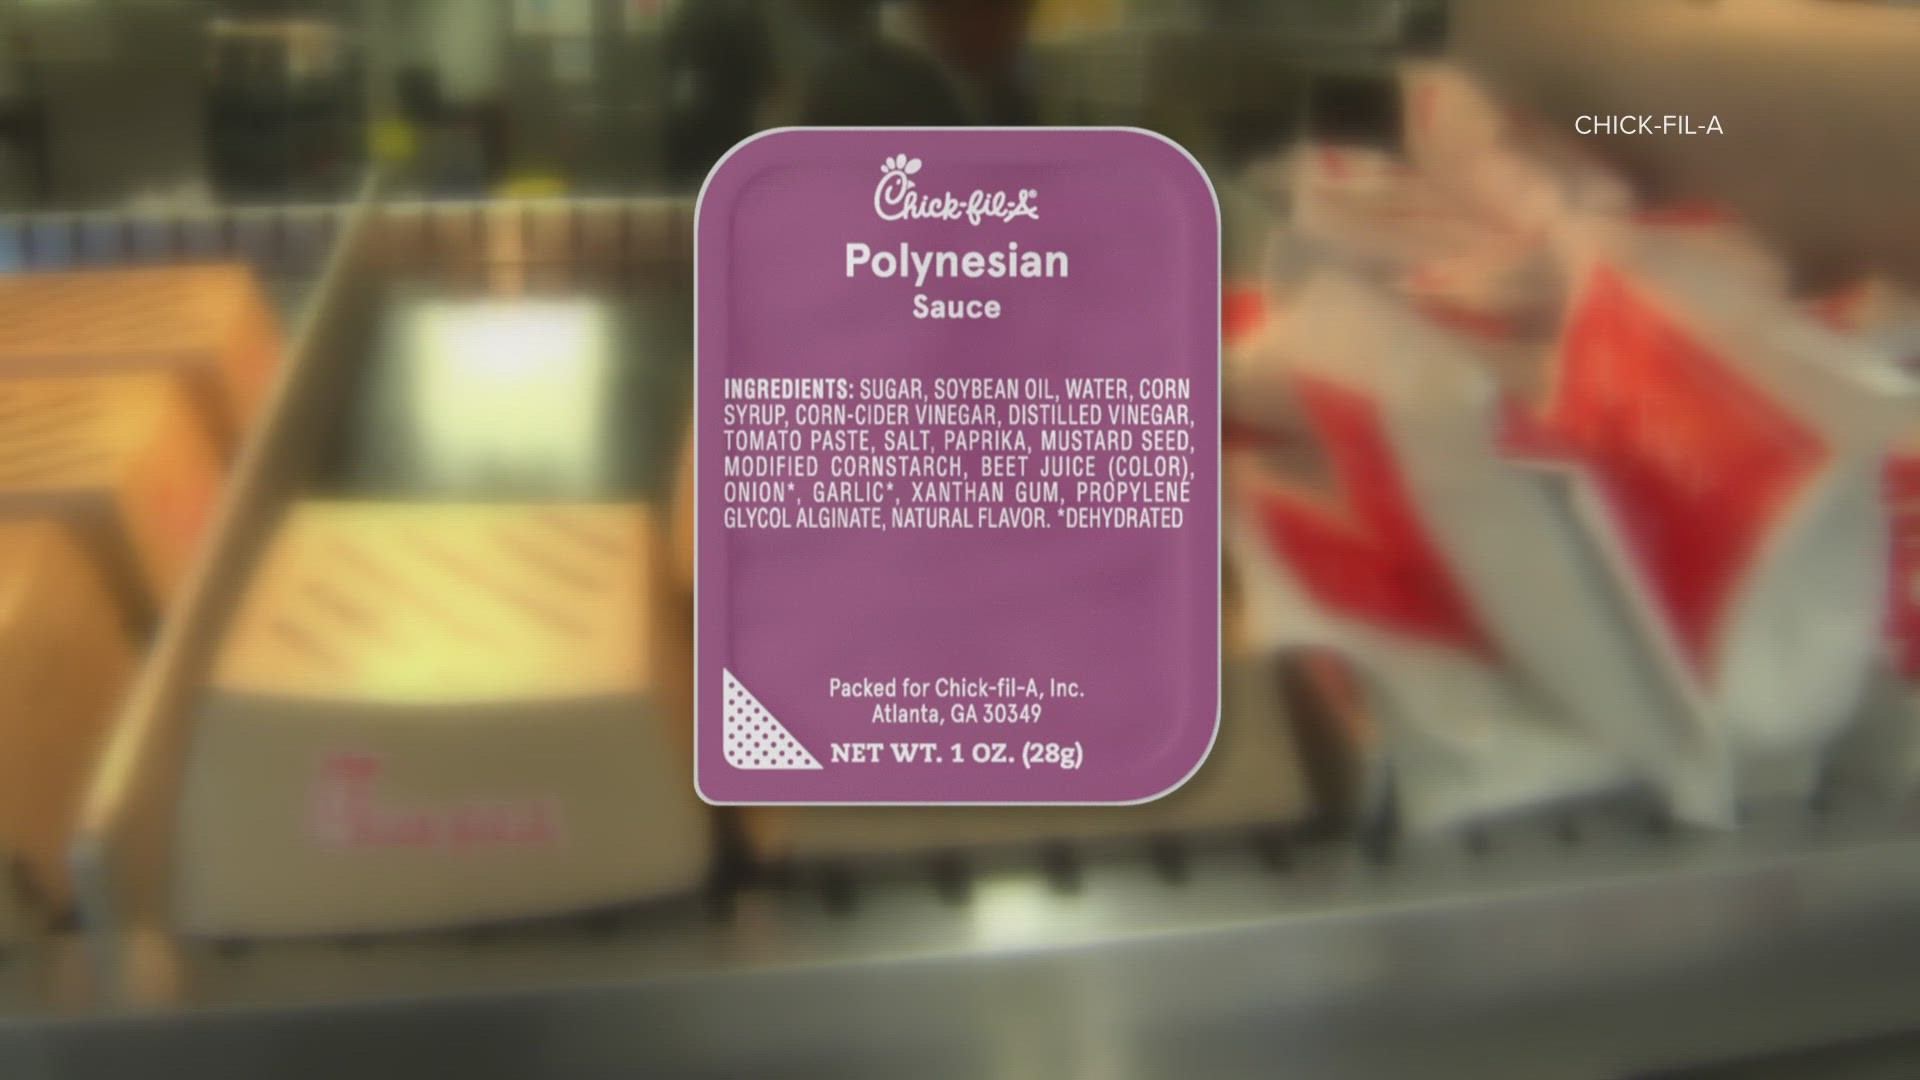 Chick-Fil-A says customers who took home the Polynesian sauce from Feb. 14 to Feb. 27 should throw them away as they may contain wheat and soy allergens.